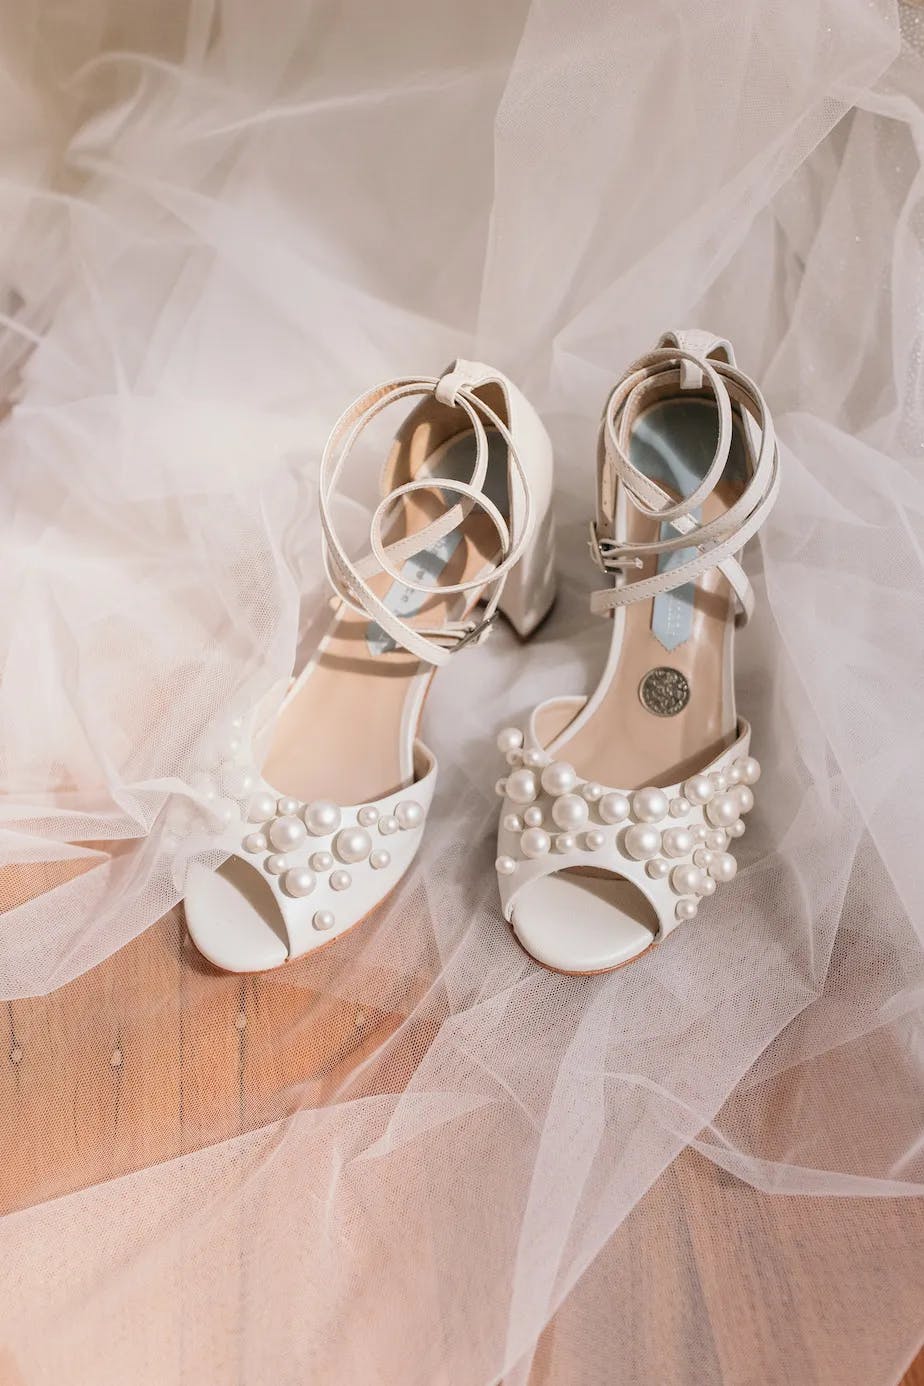 A pair of elegant white high-heeled shoes adorned with pearls and ankle straps placed on a wooden floor, with sheer tulle fabric softly draped around them, creating a delicate and dreamy atmosphere.